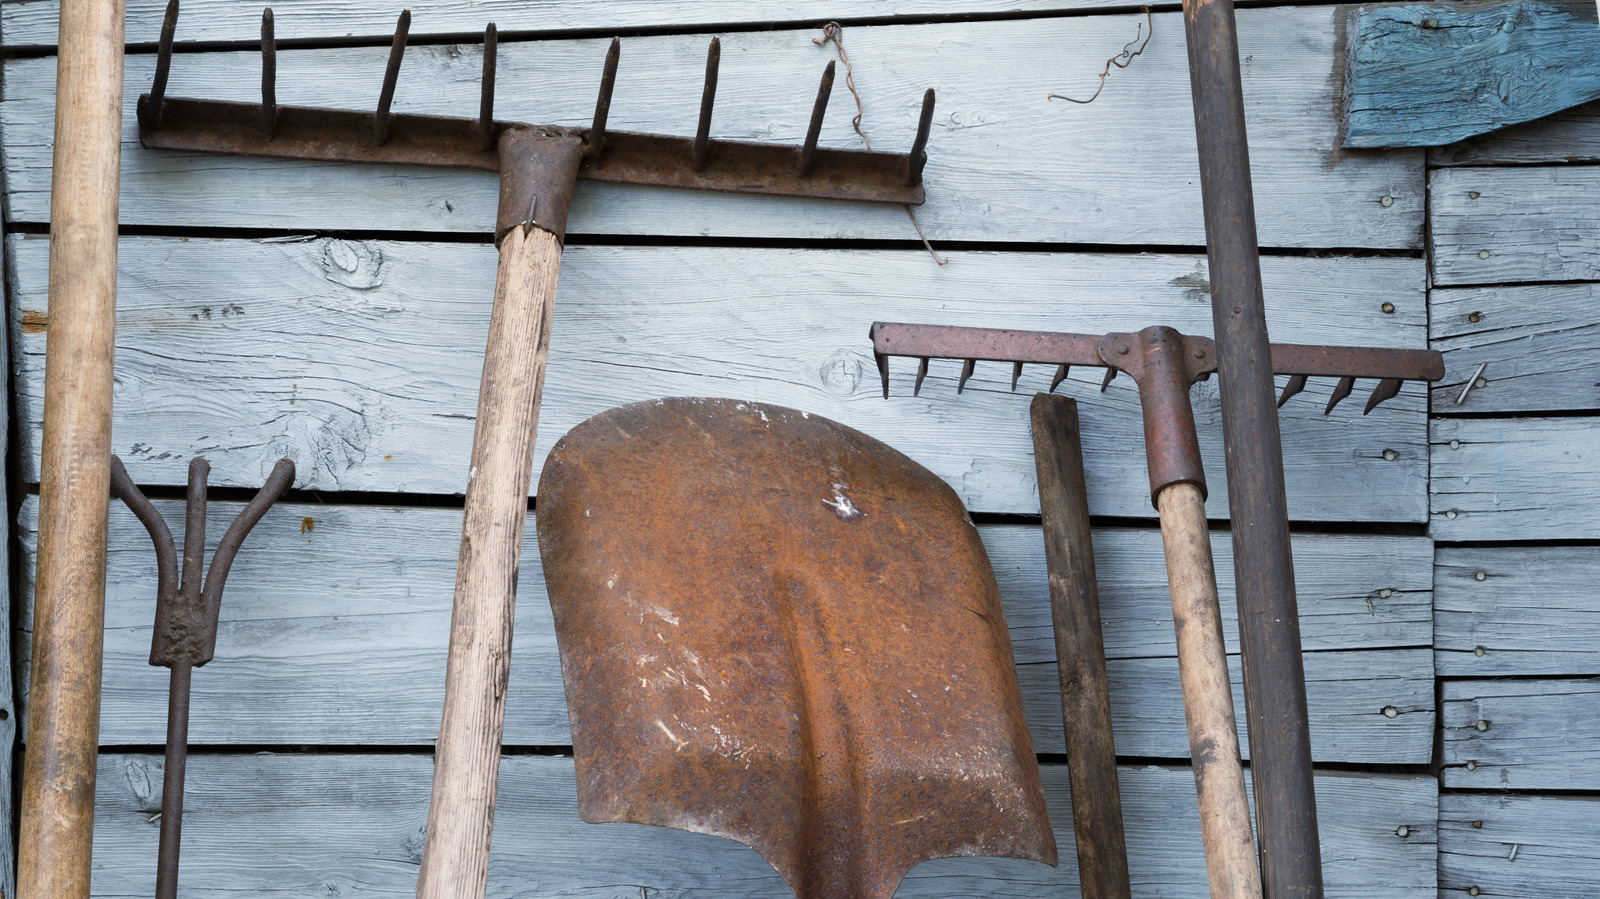 37 Brilliant Ways To Repurpose Old Garden Tools In & Around Your Home